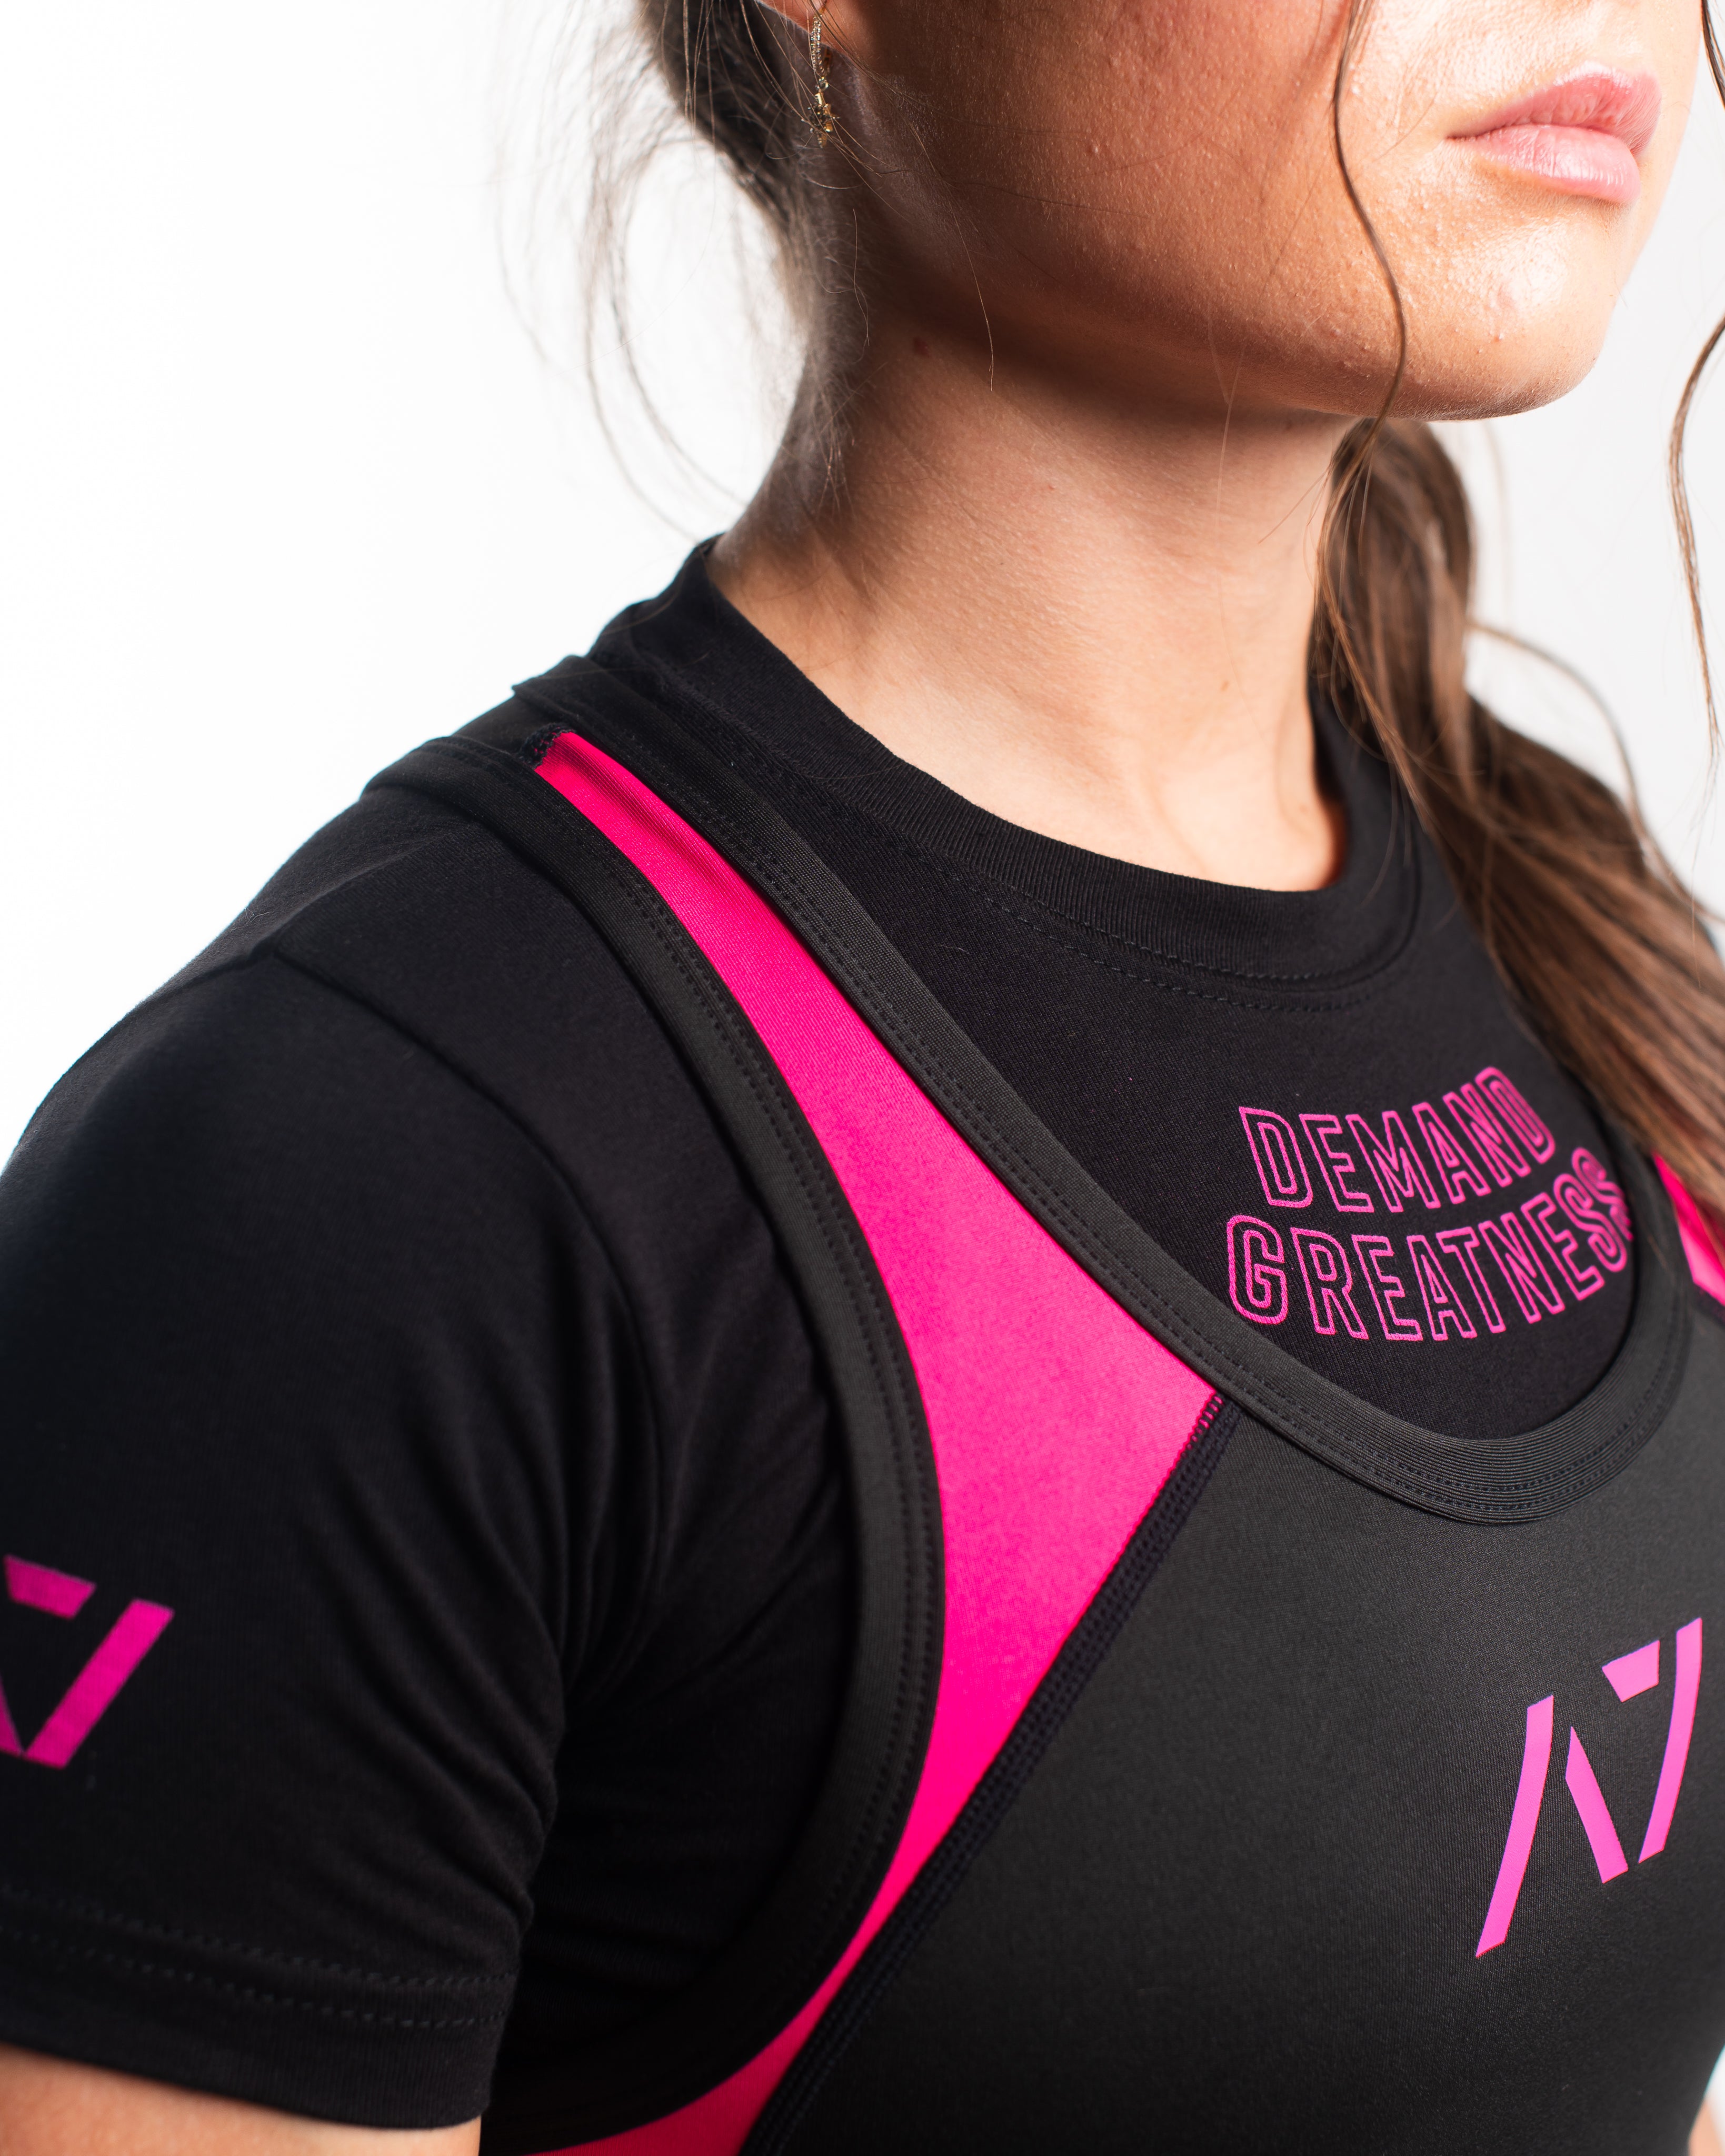 A7 IPF Approved Flamingo Luno singlet features extra lat mobility, side panel stitching to guide the squat depth level and curved panel design for a slimming look. The Women's cut singlet features a tapered waist and additional quad room. The IPF Approved Kit includes Luno Powerlifting Singlet, A7 Meet Shirt, A7 Zebra Wrist Wraps, A7 Deadlift Socks, Hourglass Knee Sleeves (Stiff Knee Sleeves and Rigor Mortis Knee Sleeves). All A7 Powerlifting Equipment shipping to UK, Norway, Switzerland and Iceland.